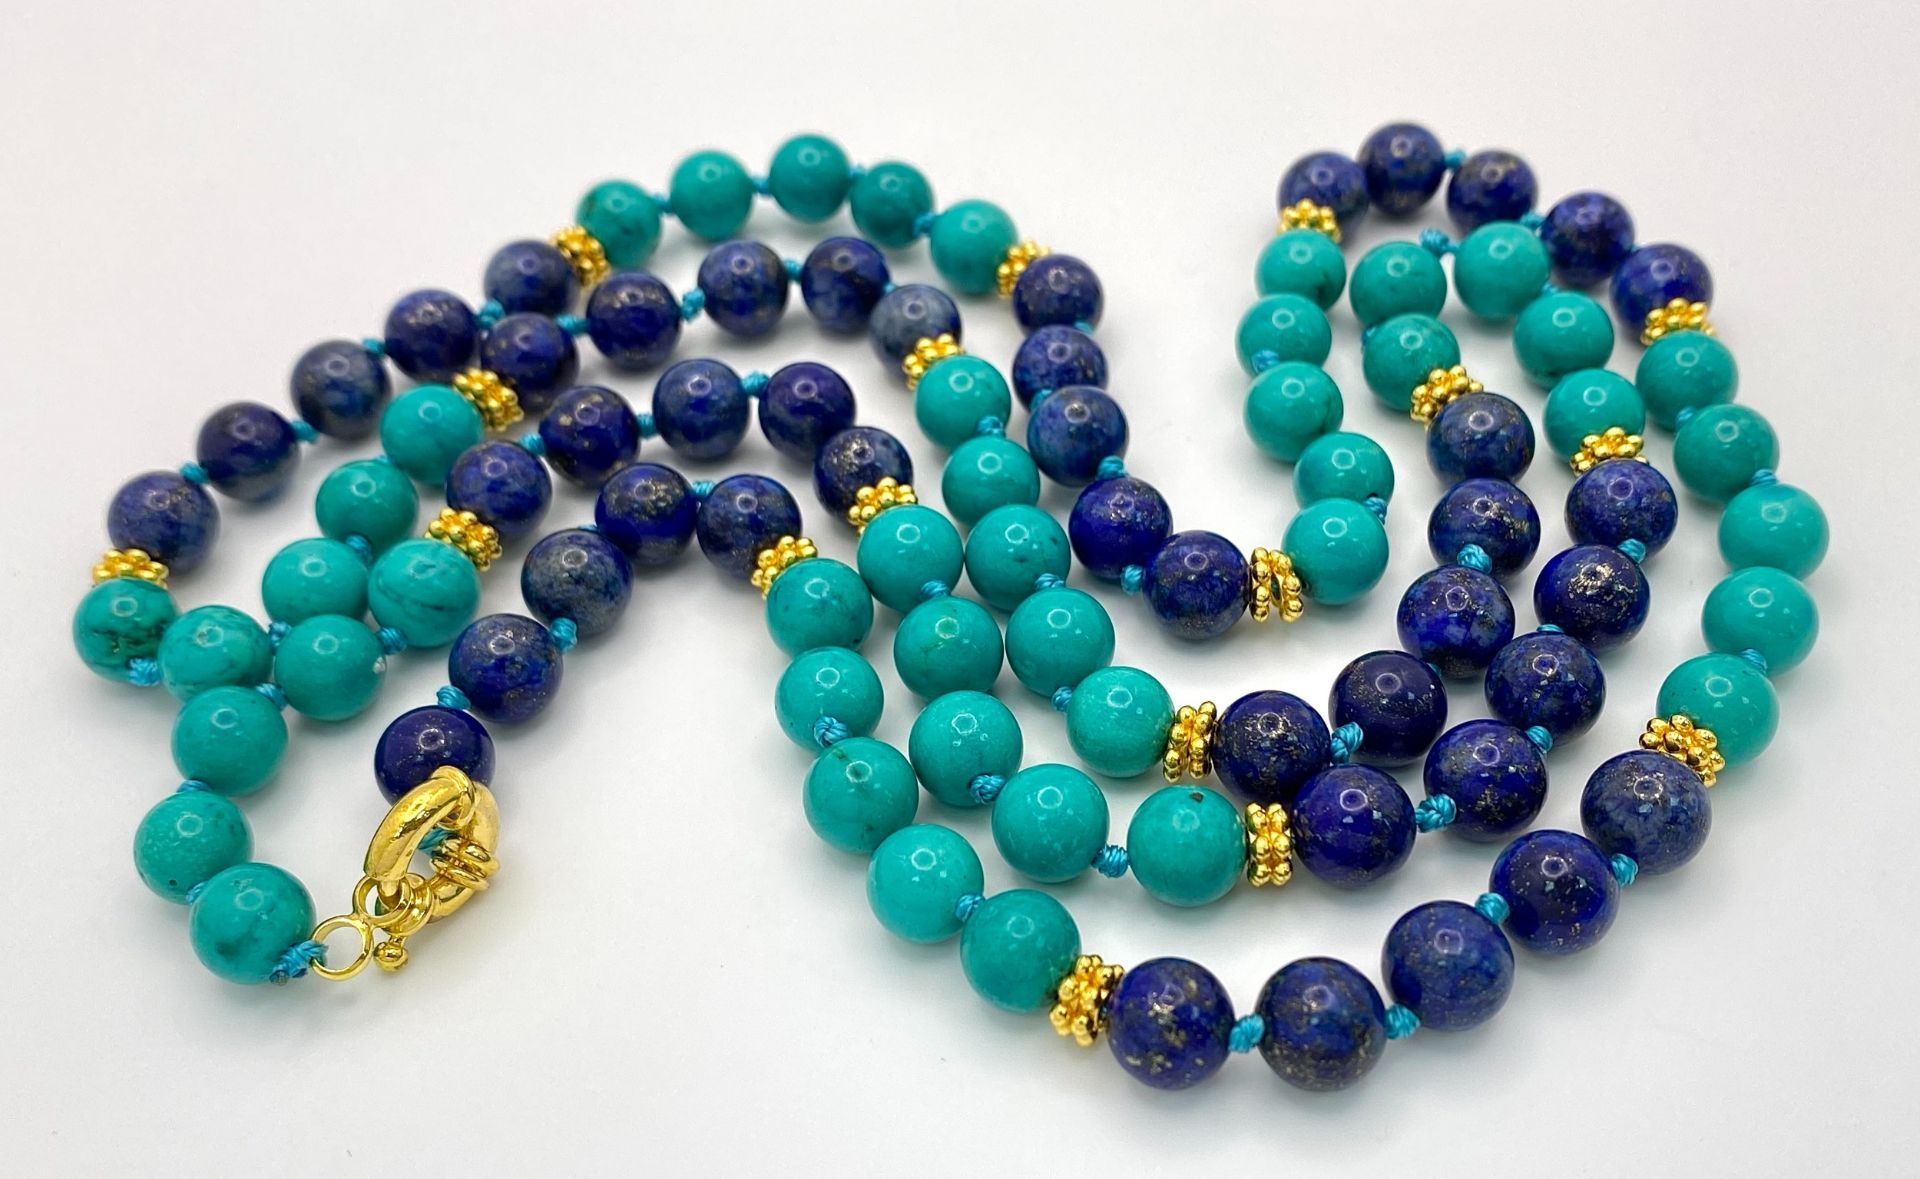 A Lapis Lazuli and Turquoise Matinee Length Beaded Necklace. 94cm length. Gilded spacers and - Image 2 of 2